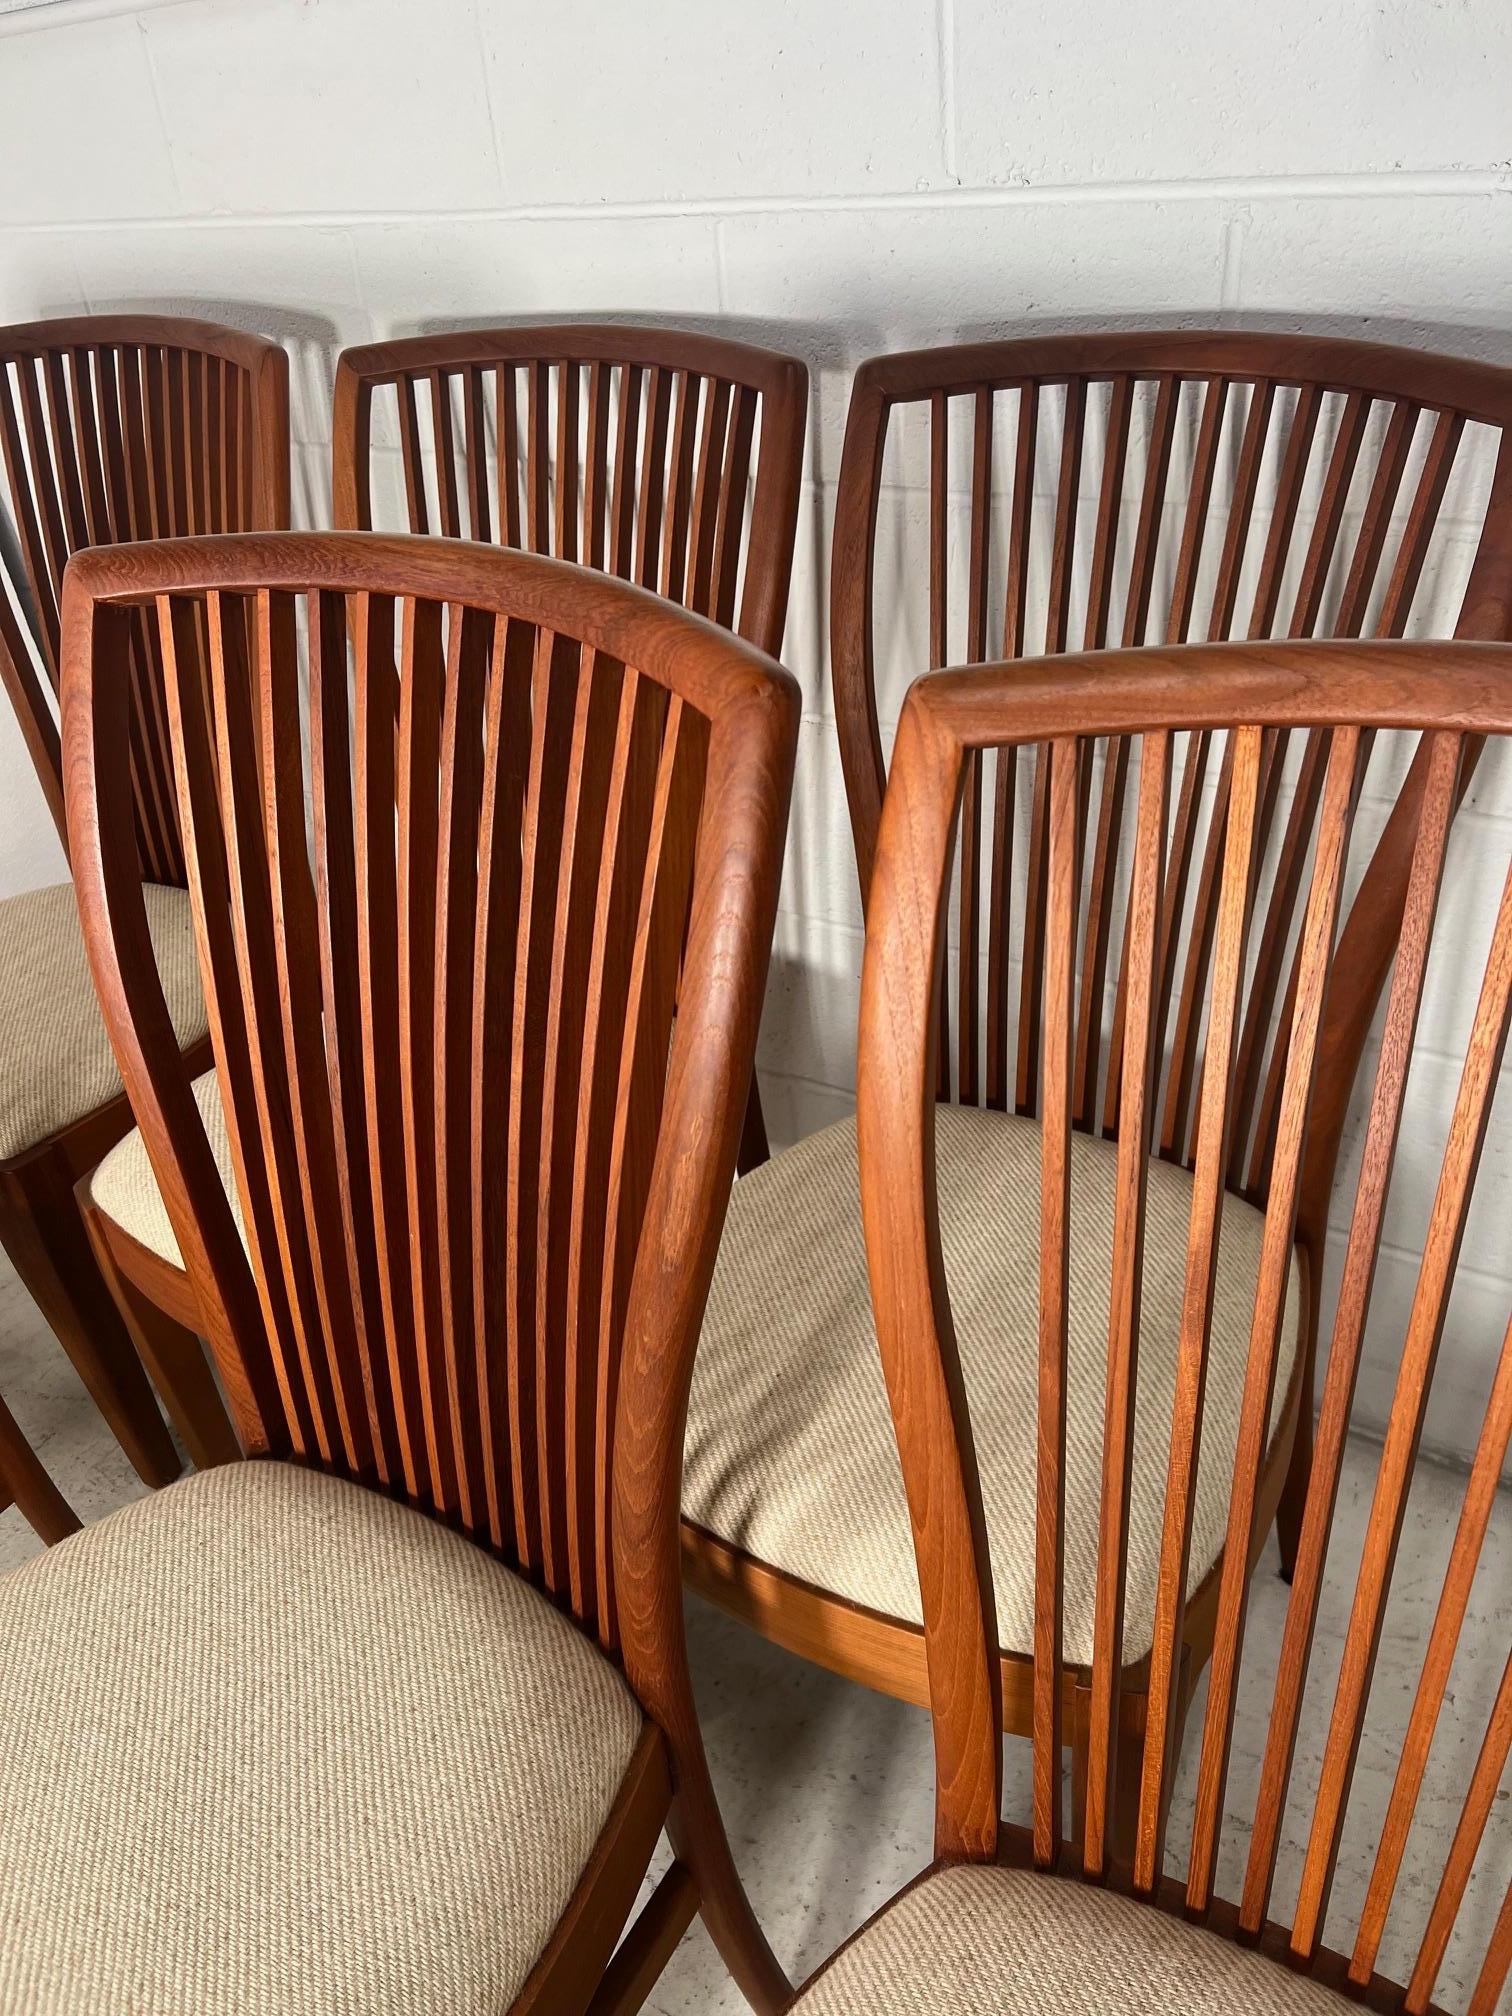 Set of 6 mid century modern Danish teak dining chairs by Sun Cabinet.

Excellent vintage condition. Some minor marks on the frames.

Dimensions: W x D x H

18